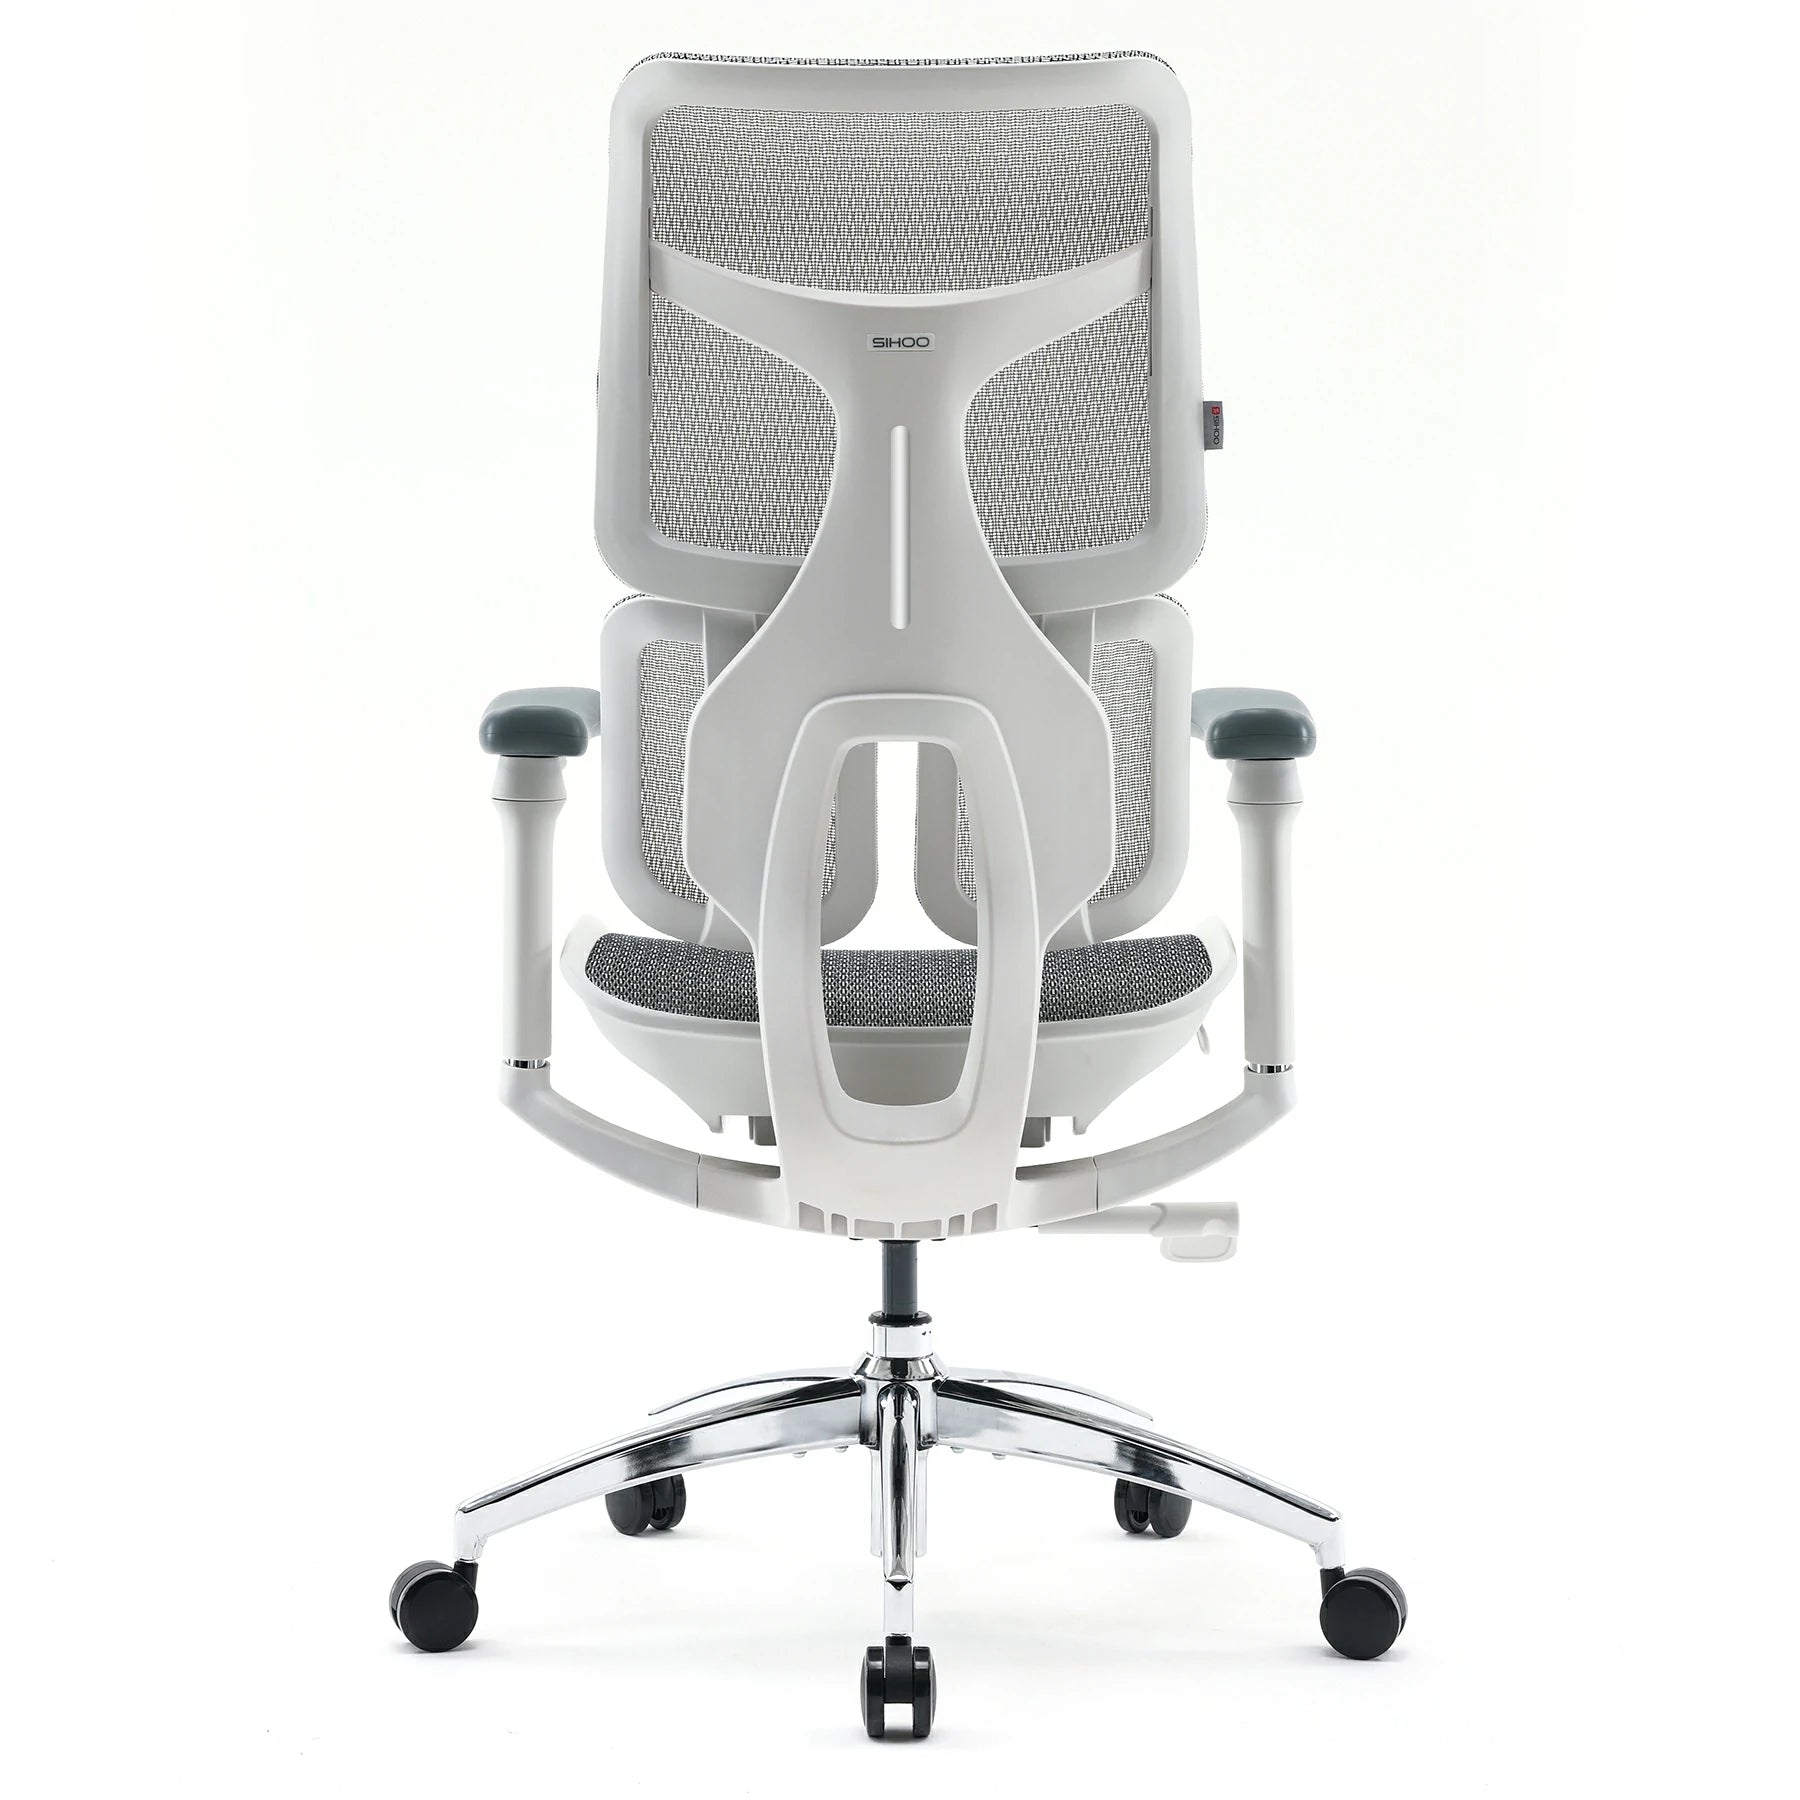 Sihoo Doro S100 Ergonomic Office Chair with Double Dynamic Lumbar Support